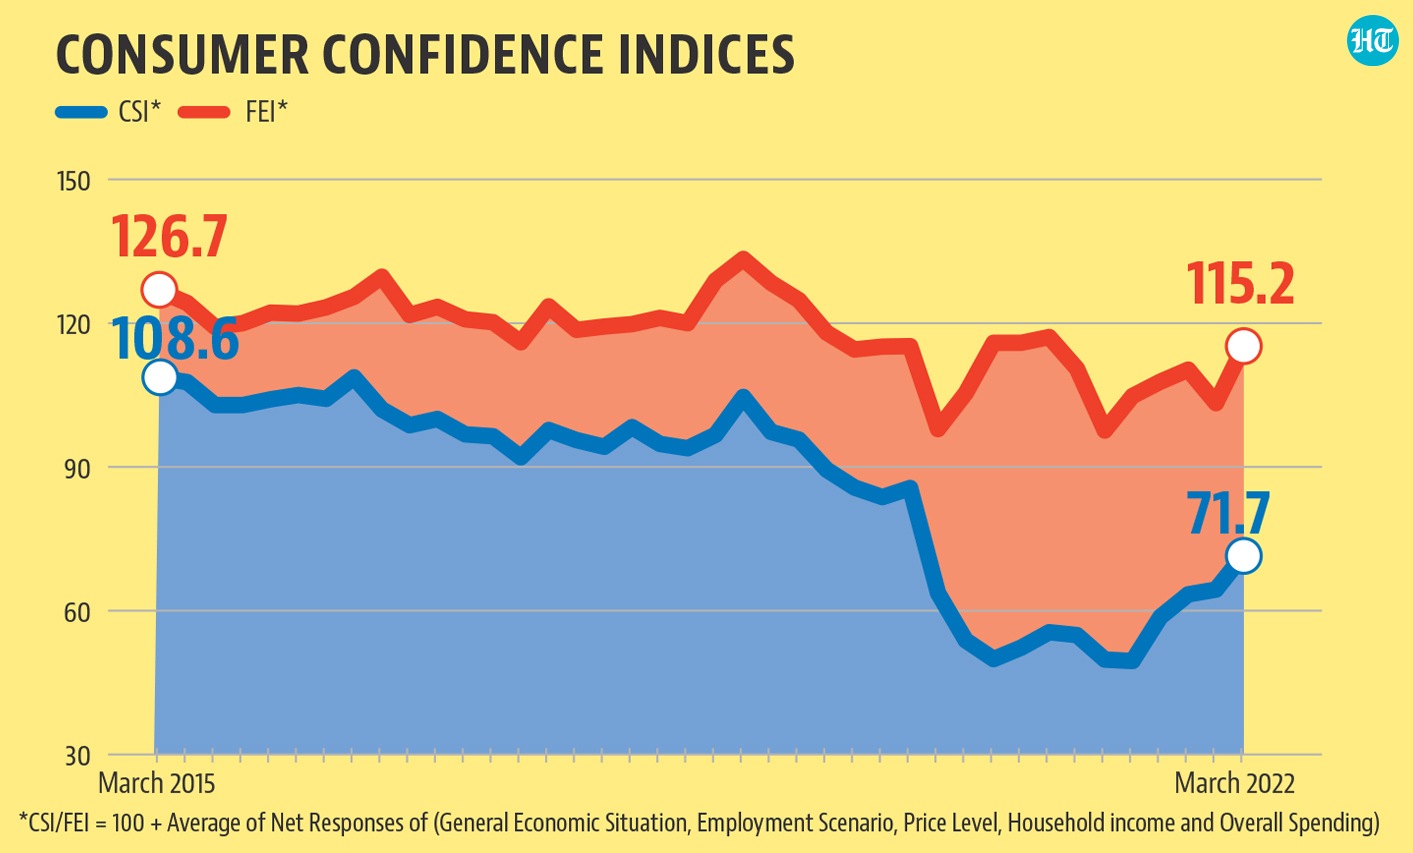 While consumer confidence has been increasing since September 2021 , it is still way below pre-pandemic levels.